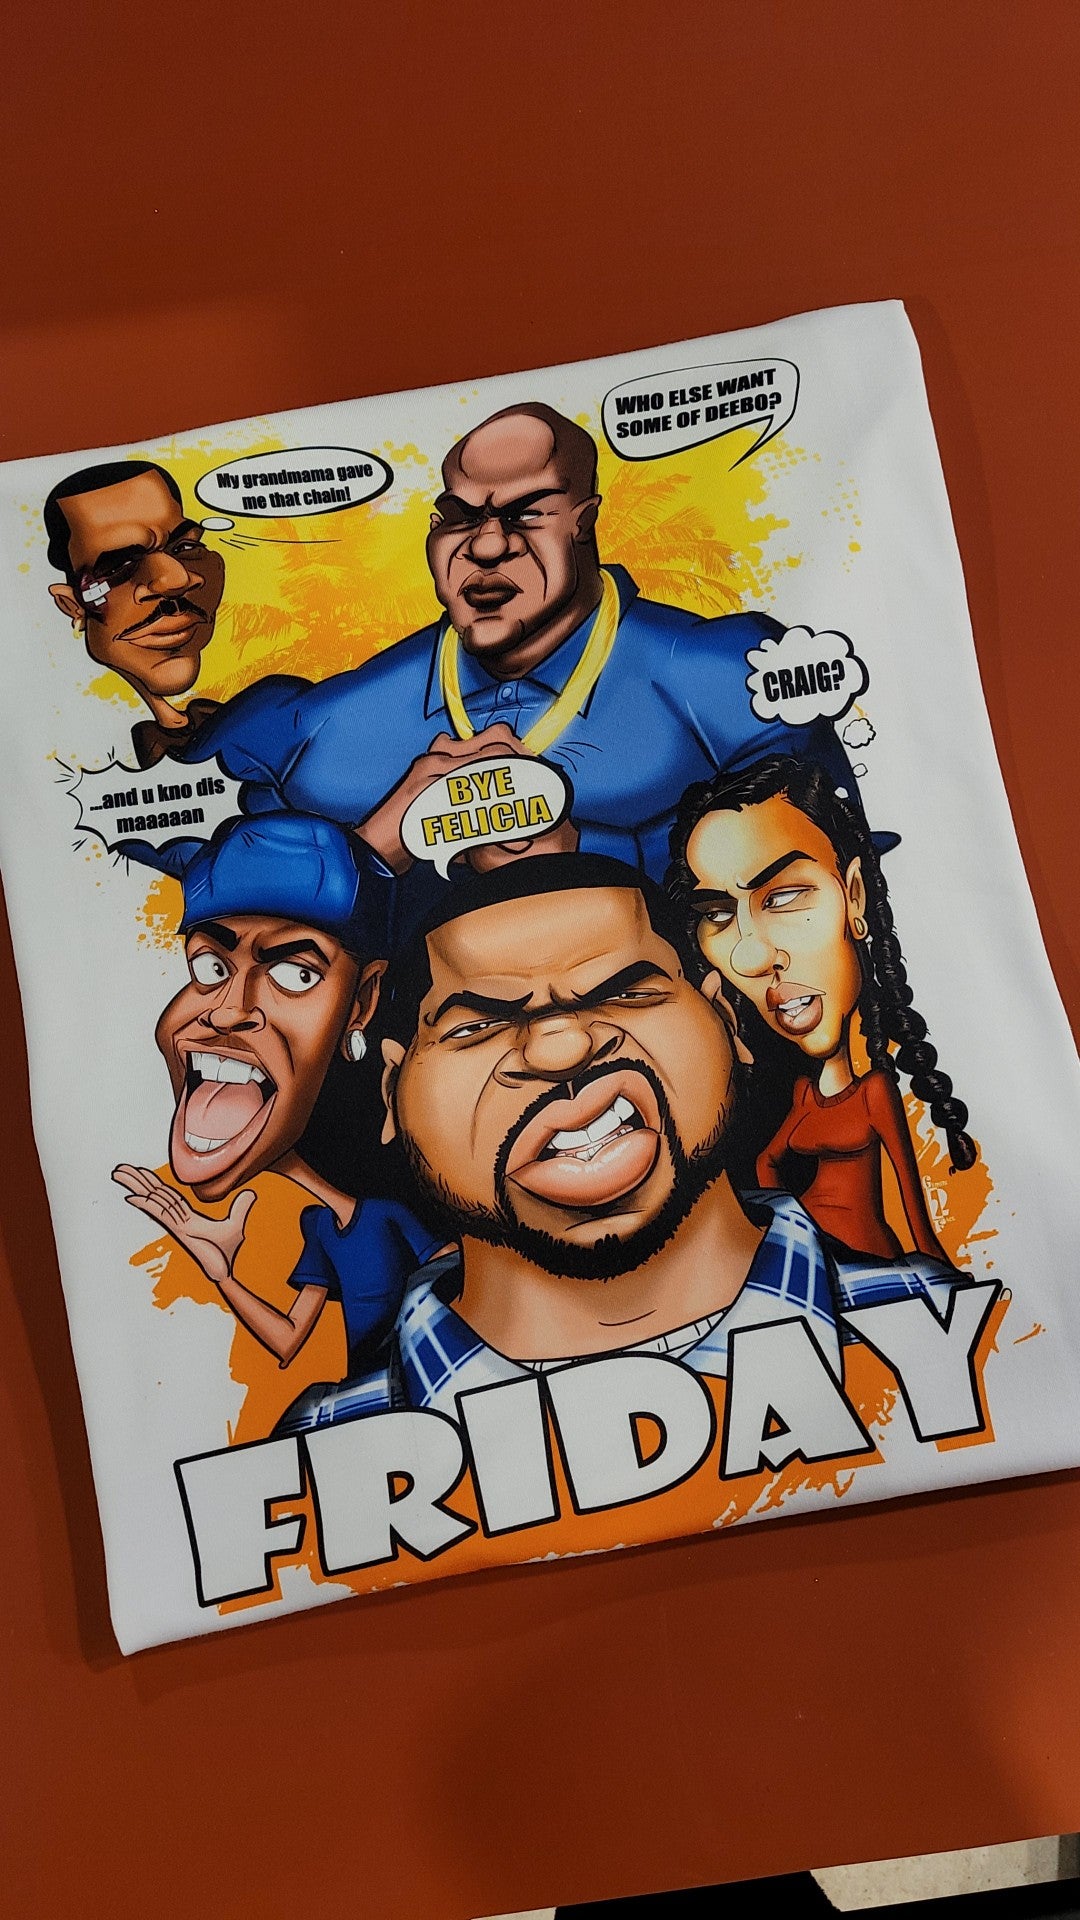 friday ice cube poster